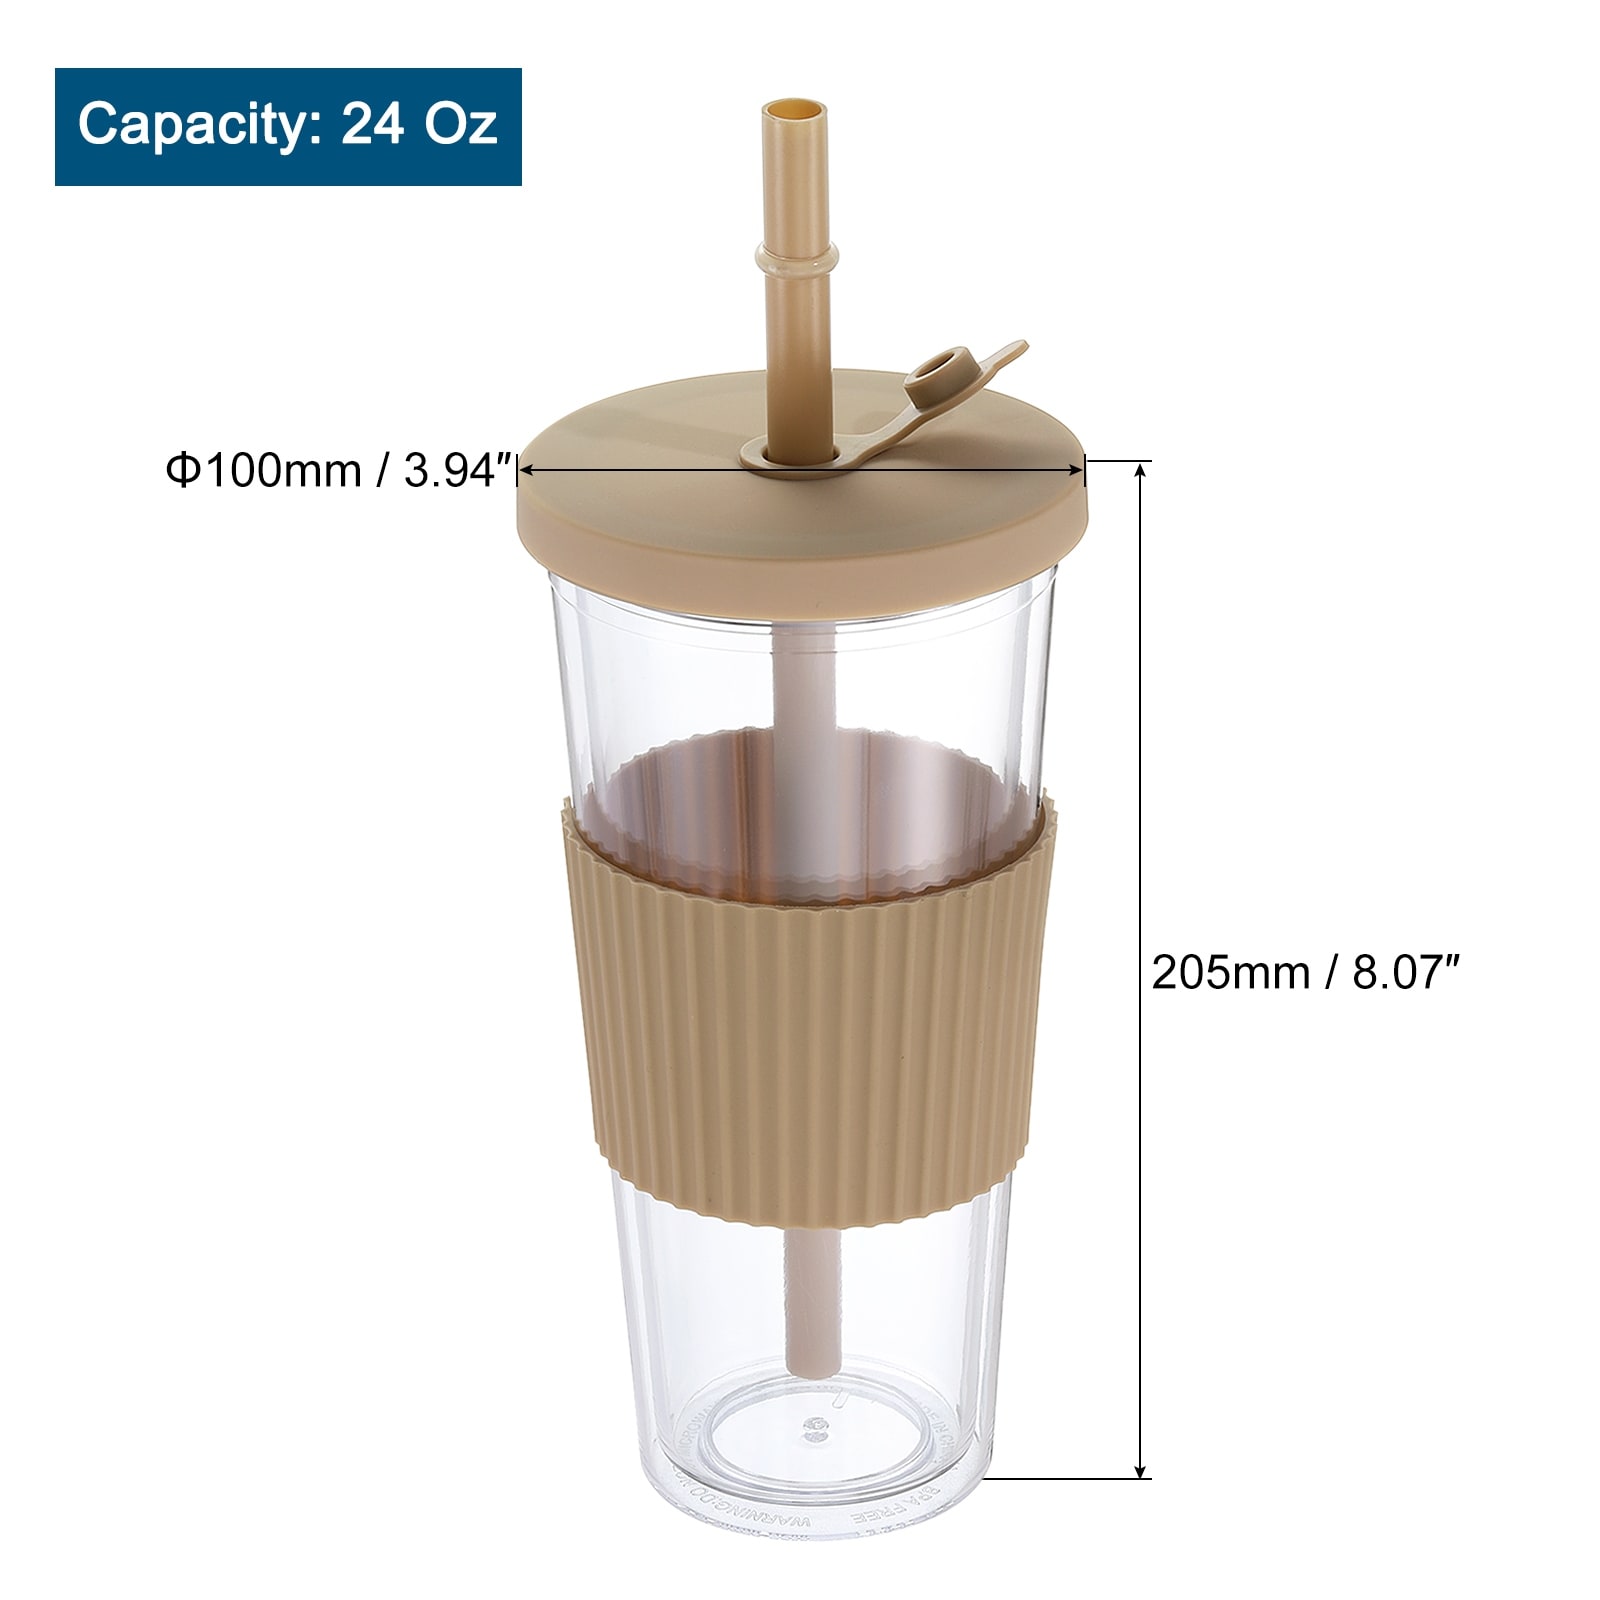 https://ak1.ostkcdn.com/images/products/is/images/direct/4c3cb3bdf39be46a394506b13eff1dd899692a0b/Reusable-Boba-Cups-with-Lid-%26-Straw%2C-24-Oz-Acrylic-Tumbler-Cups%2C-Clear-Green.jpg